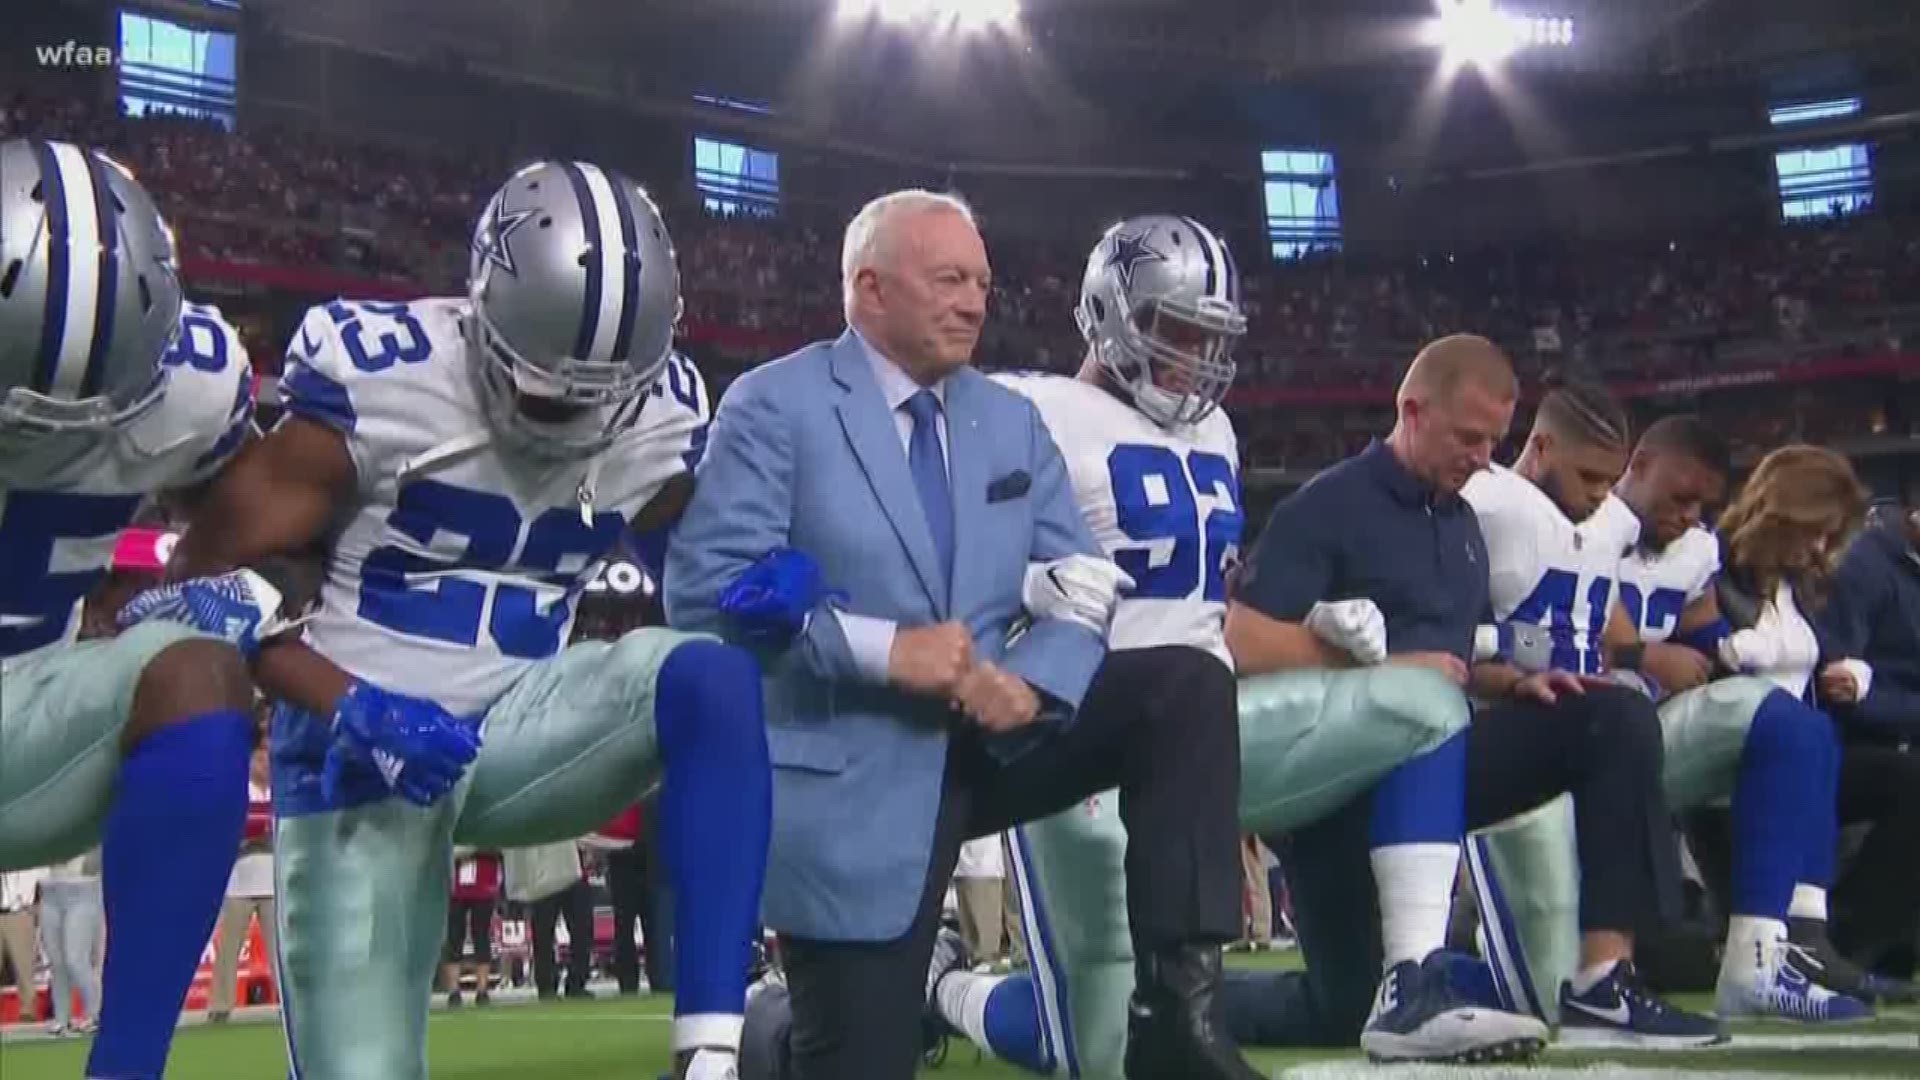 Cowboys owner Jerry Jones clearly states his players will stand for the national anthem.